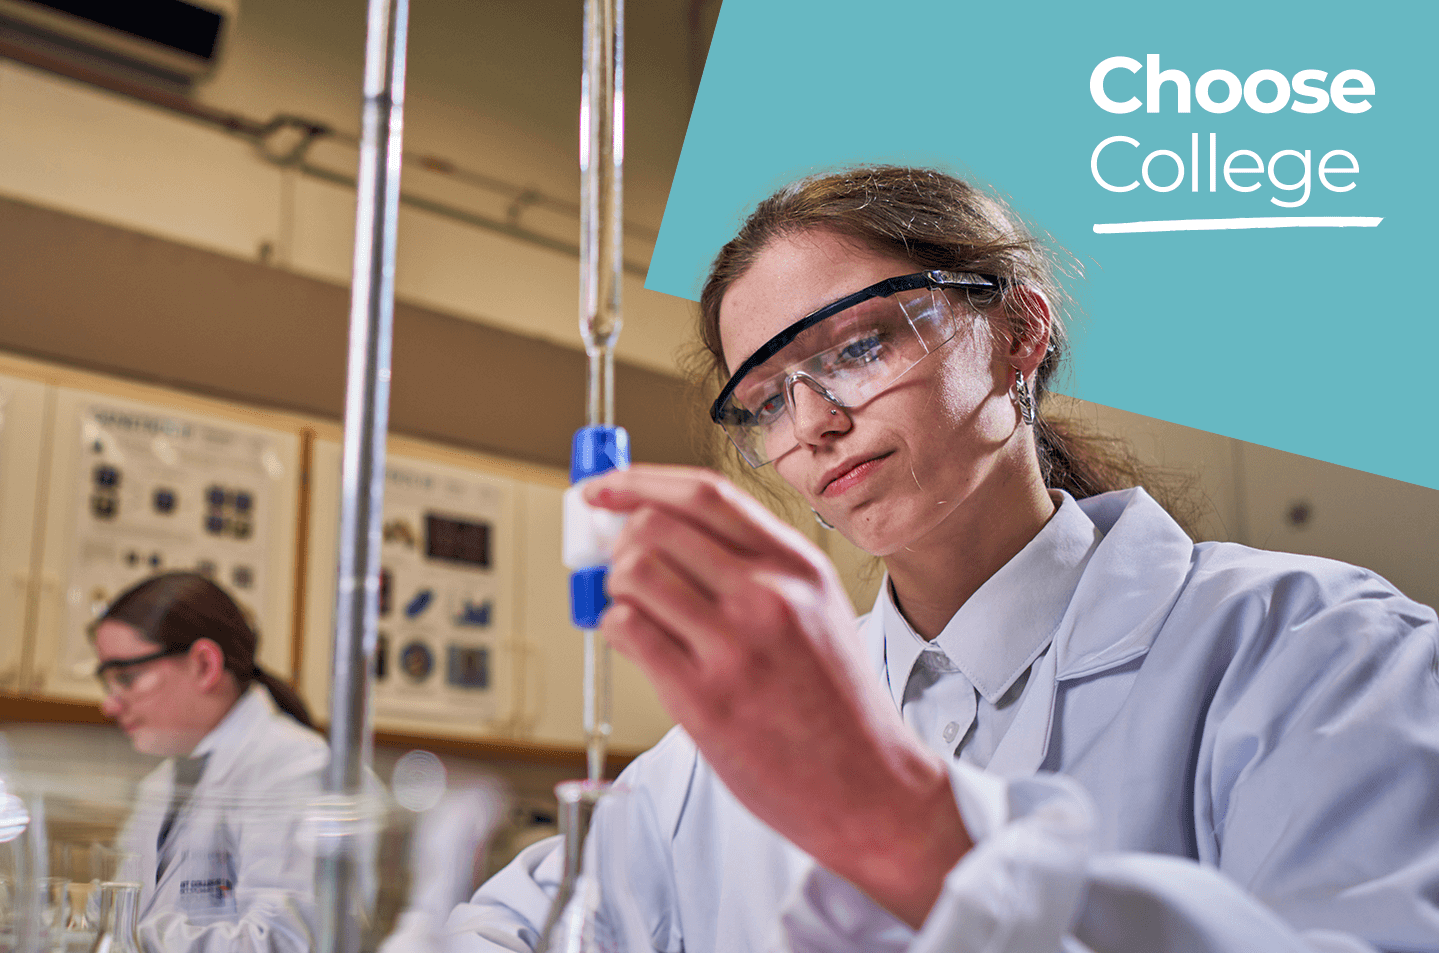 Scotland’s colleges collaborate on national #ChooseCollege campaign